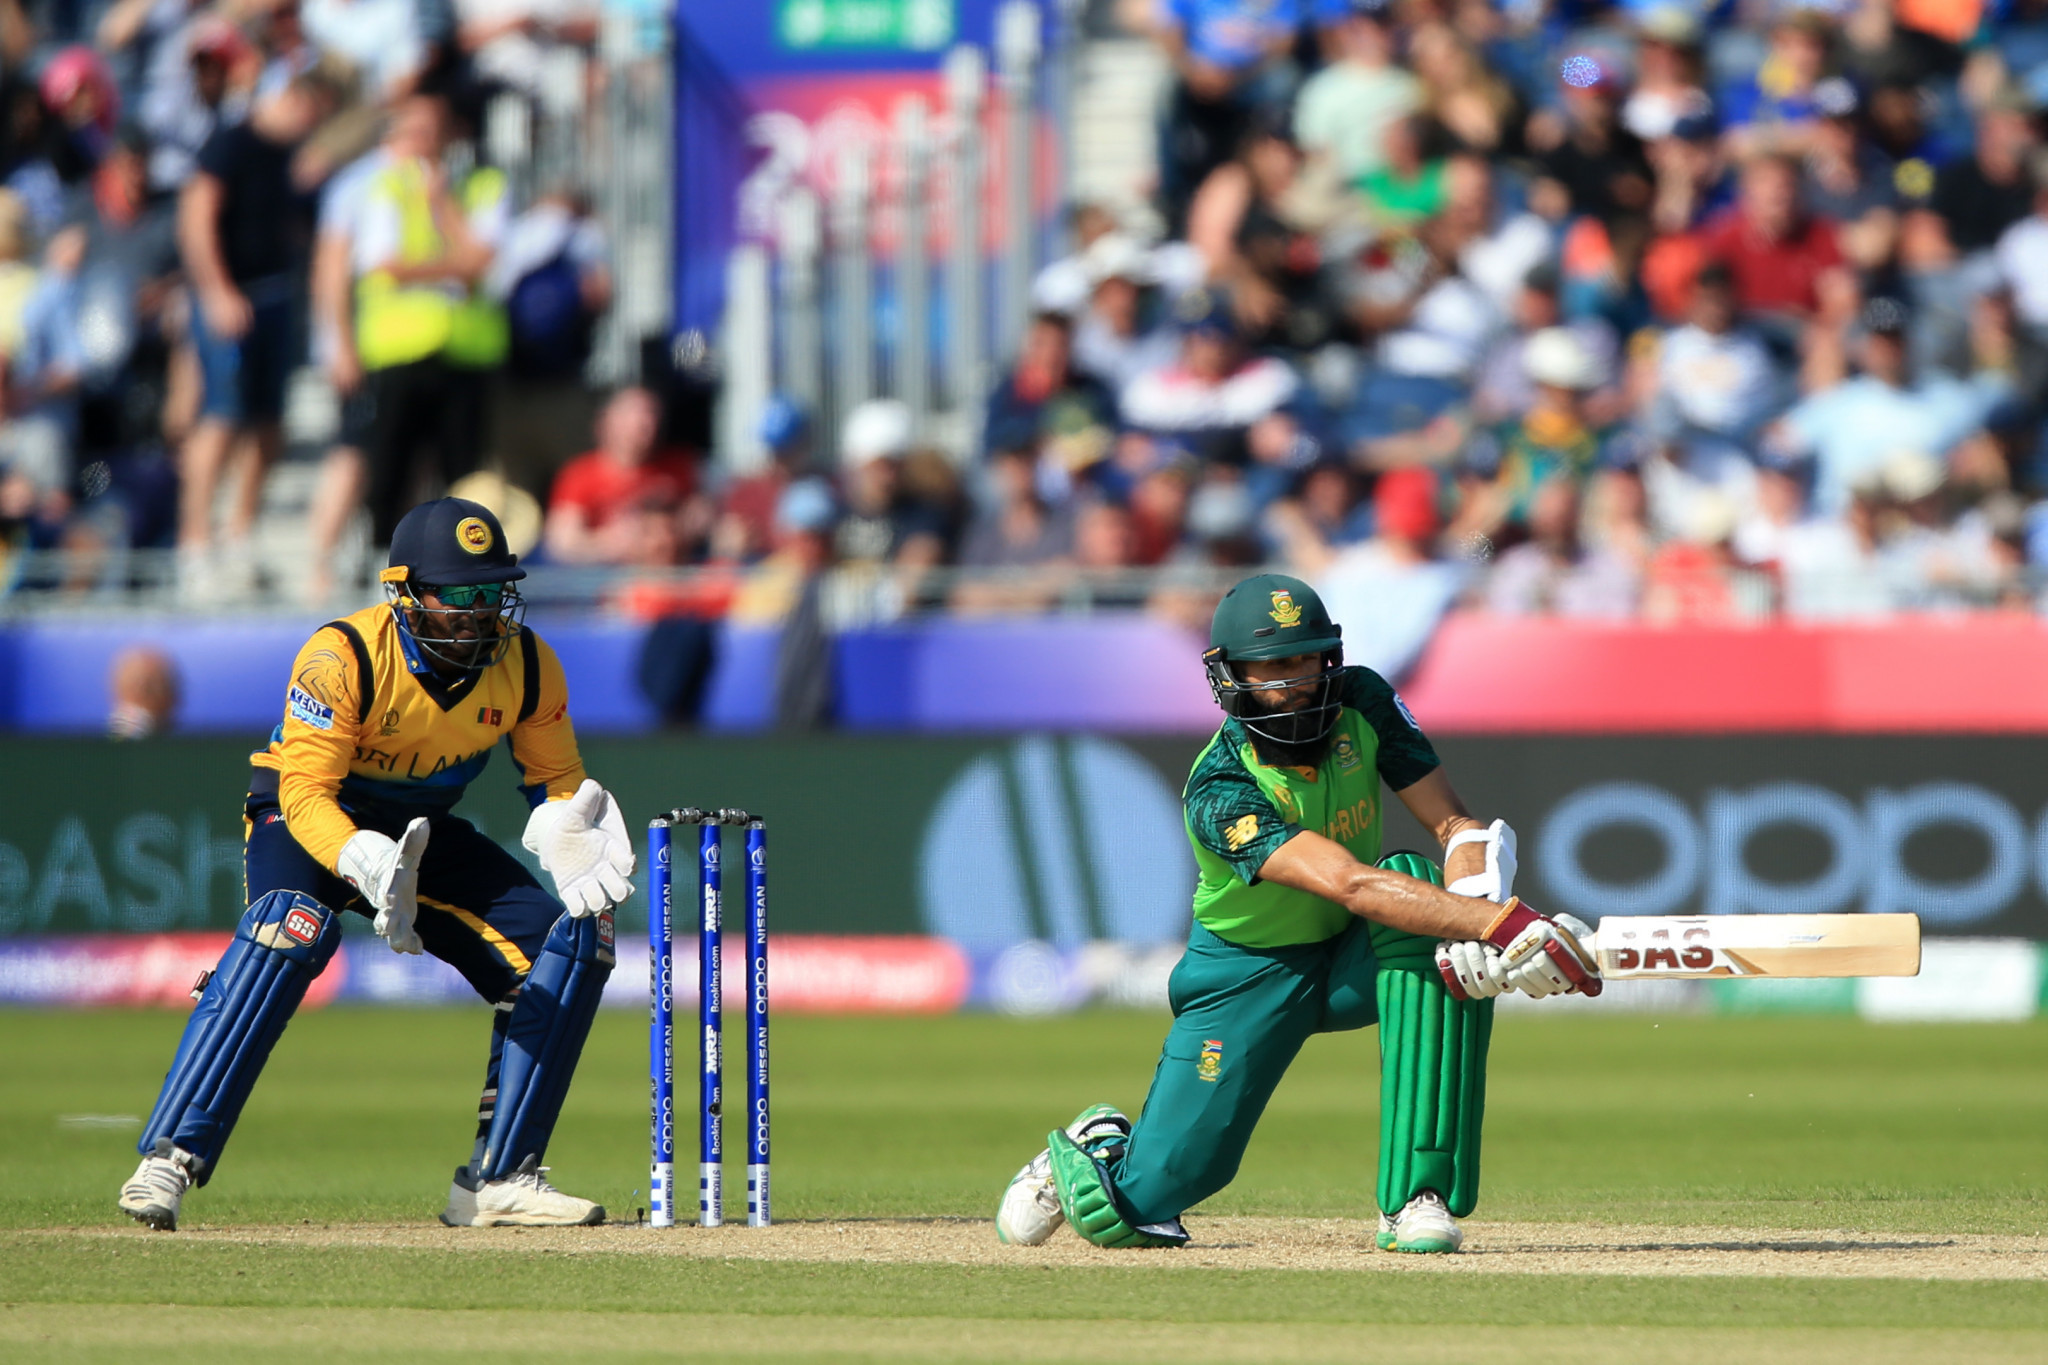 Hashim Amla also starred with the bat as South Africa inflicted a defeat on Sri Lanka which dents their hopes of reaching the semi-finals ©Getty Images